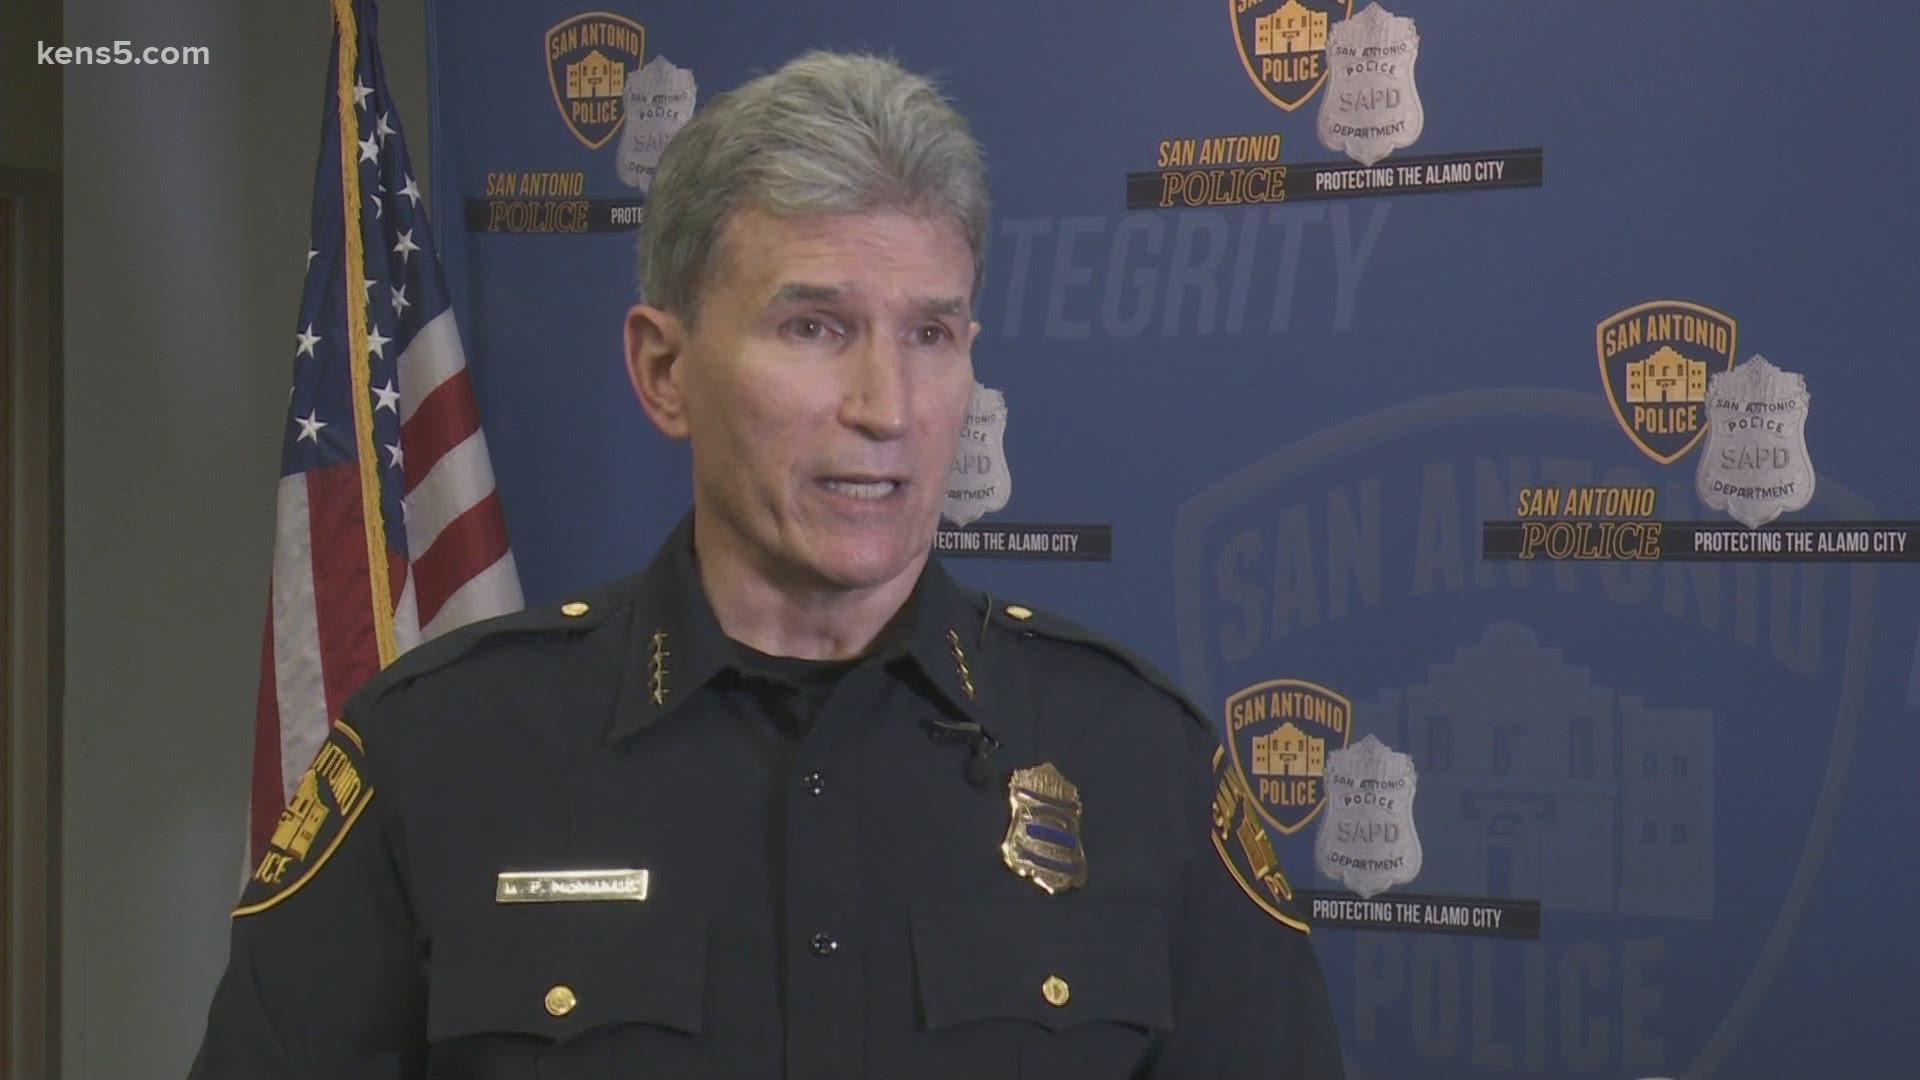 "That's nothing but a bigoted, cowardly move to do something like that, it's not San Antonio by any means," said SAPD Chief William McManus.